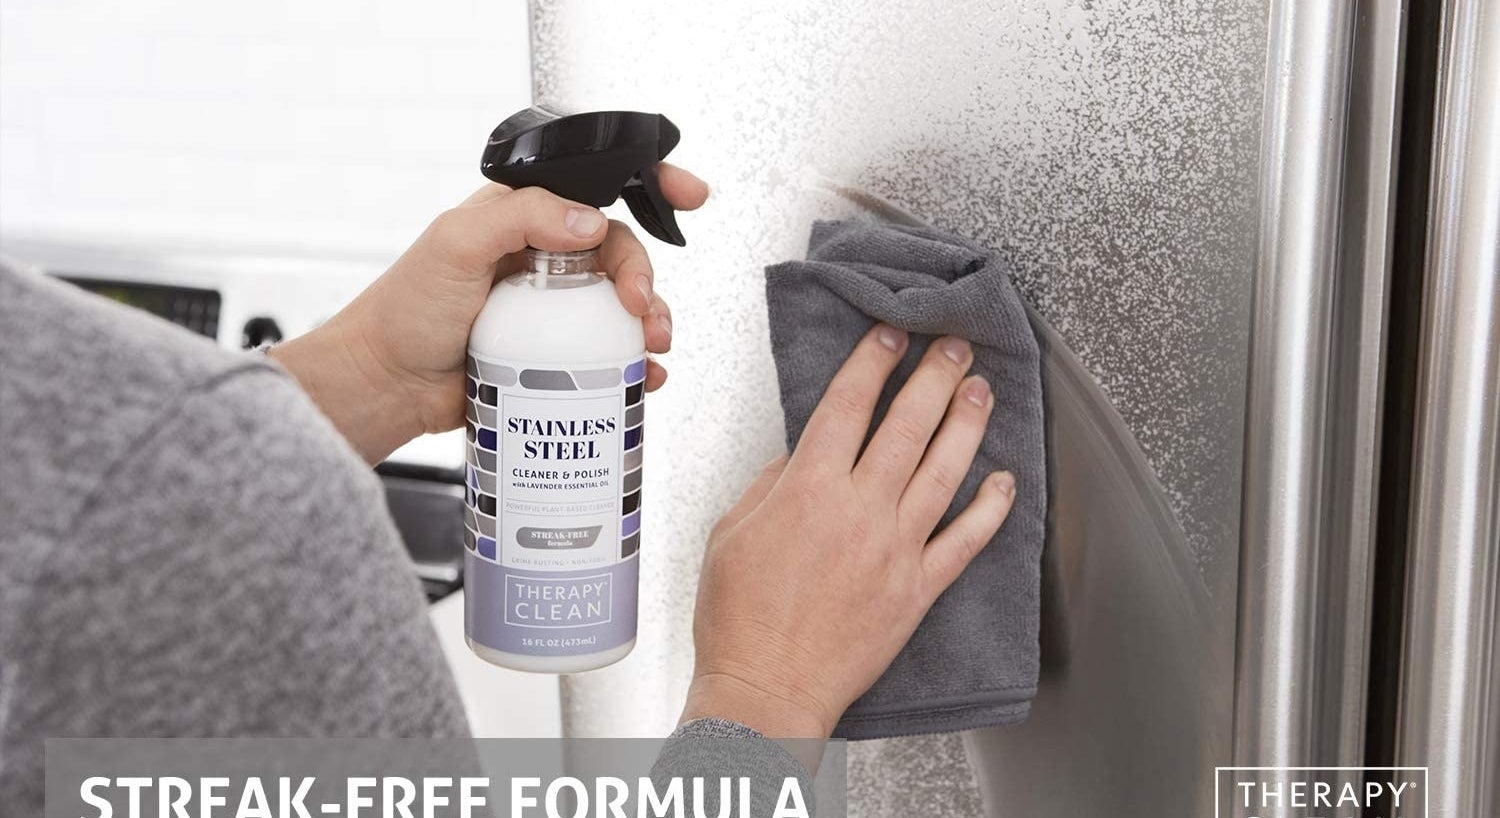 Hands spraying the white cleaner on a fridge, then wiping with a microfiber cloth